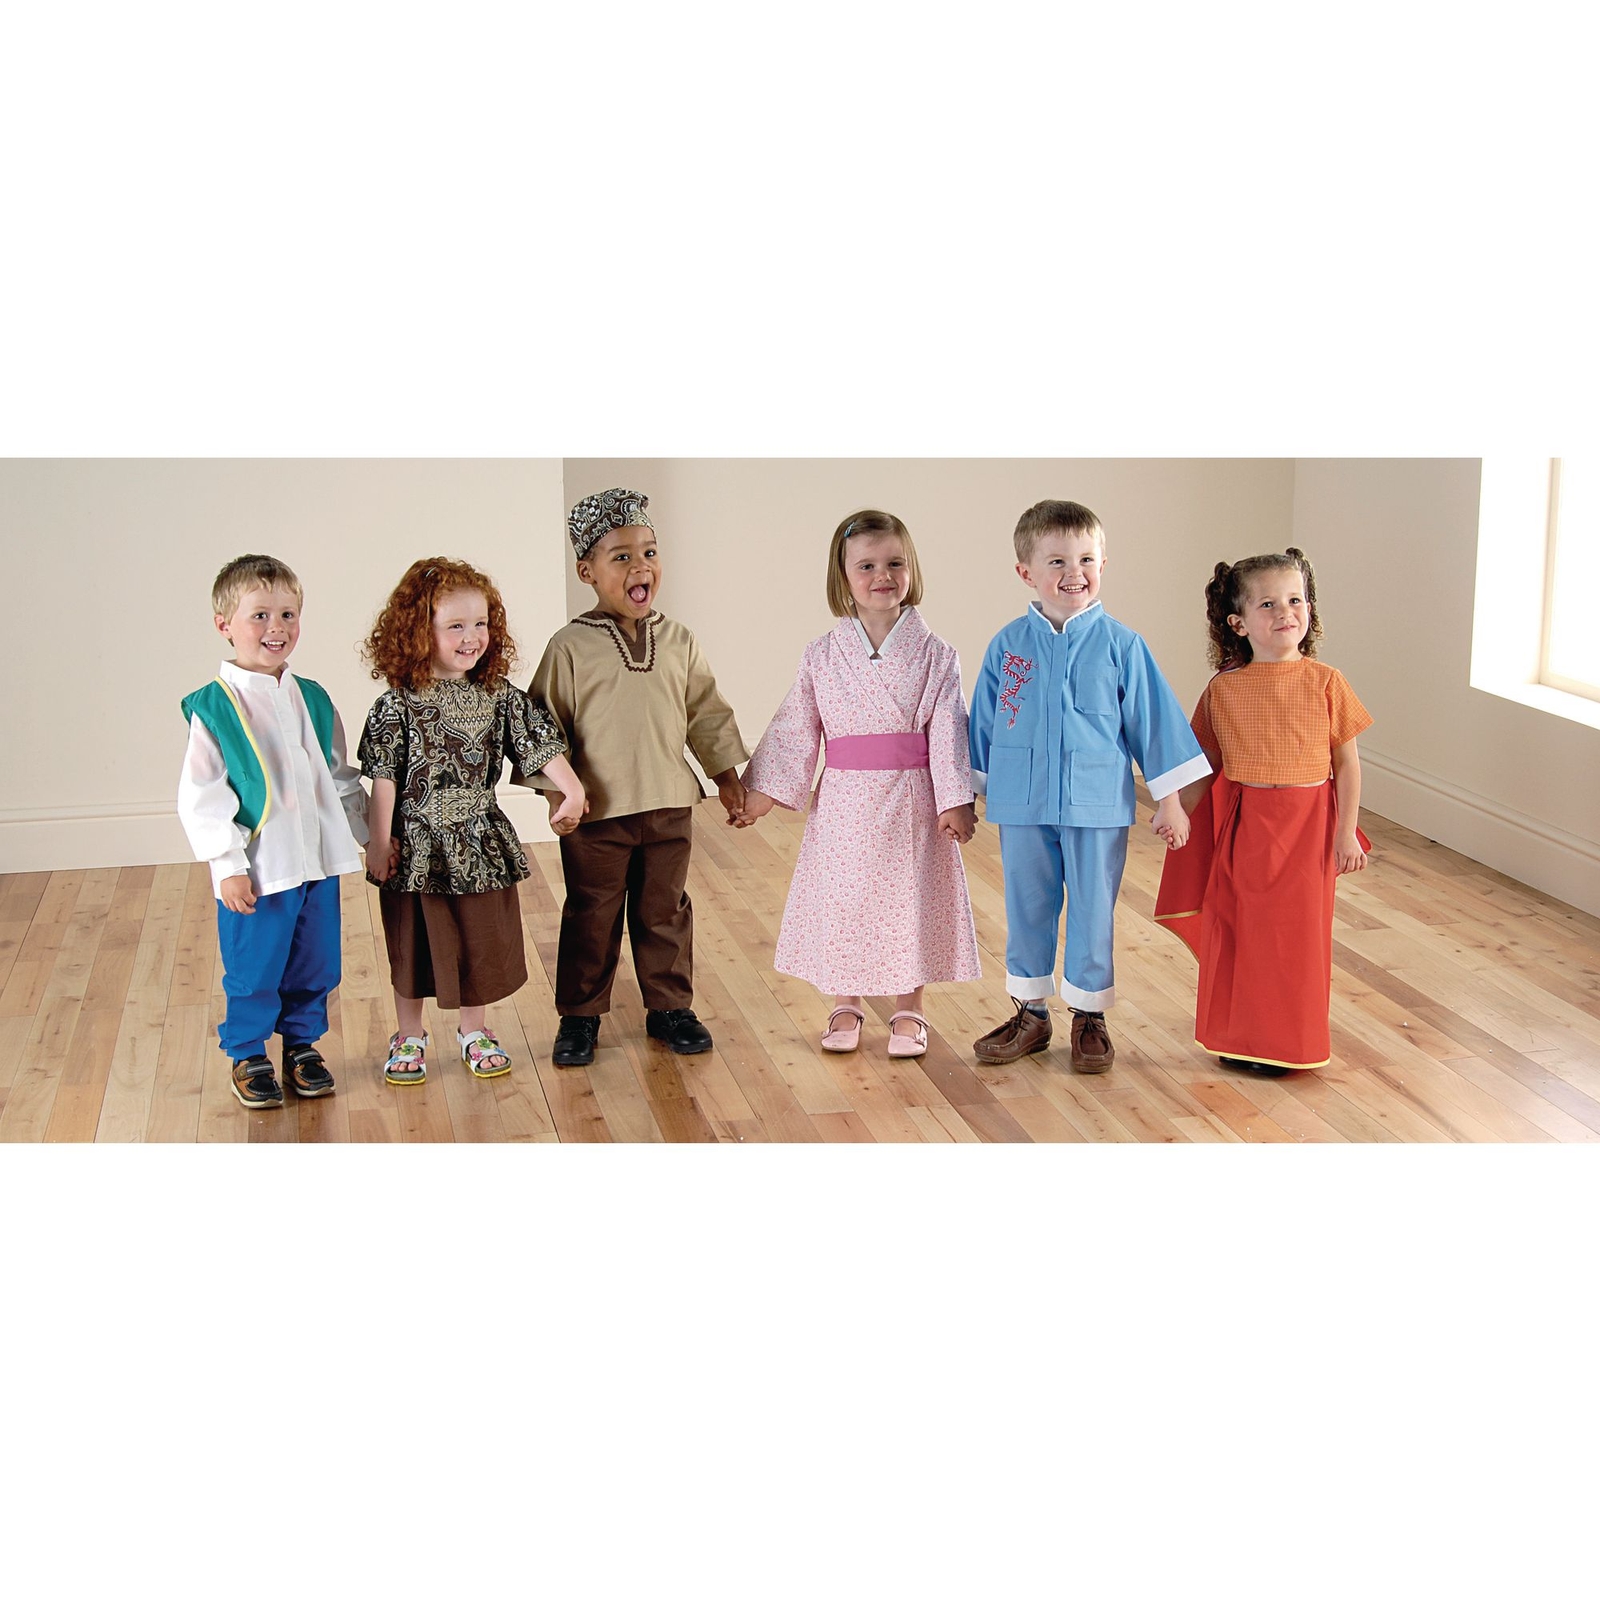 Multicultural Costumes Multibuy Offer - Pack of 6